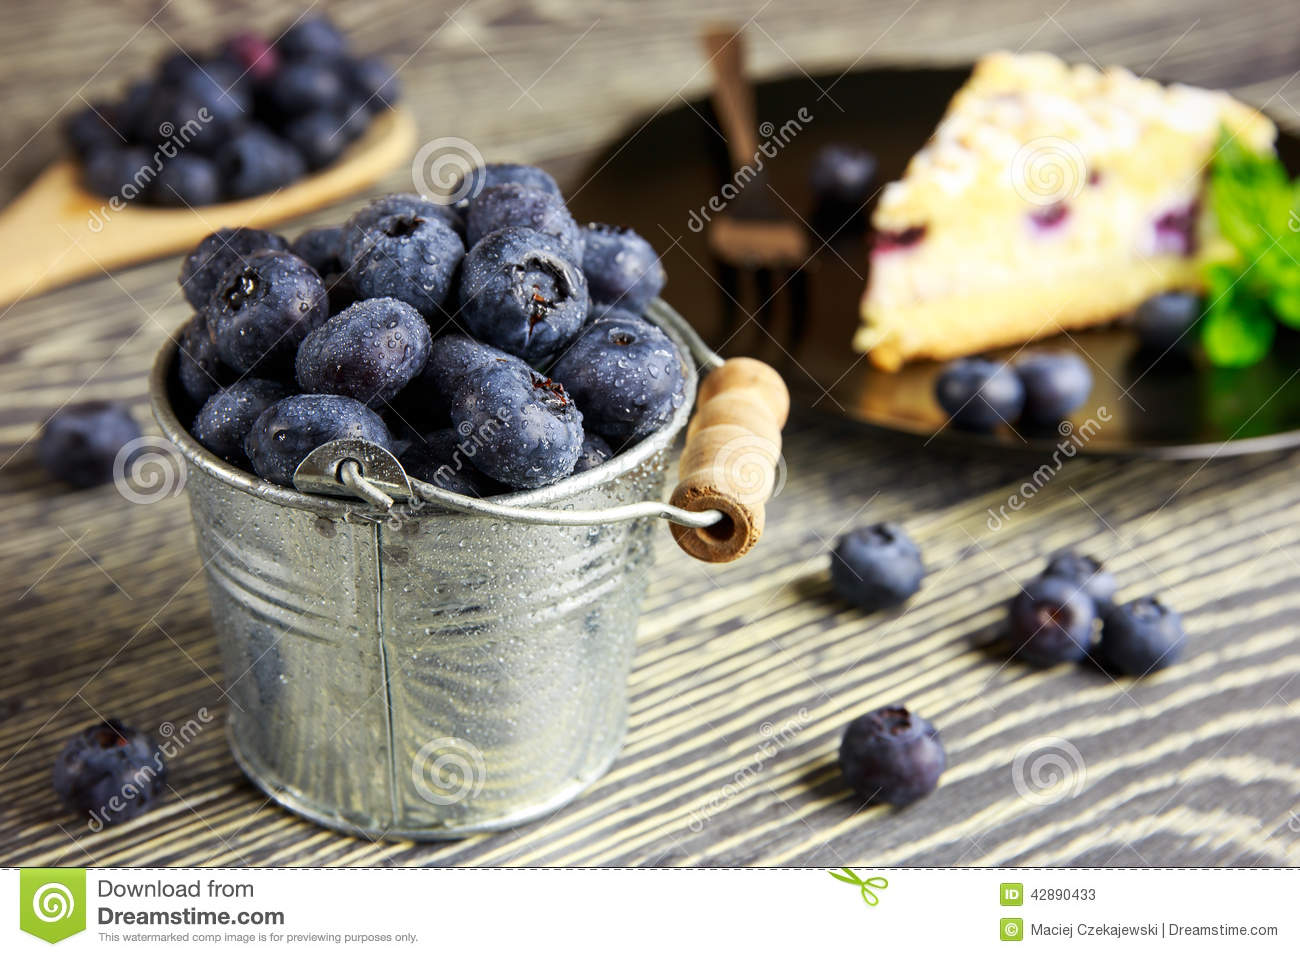 Blueberry Cake And Fresh Fruits Arranged On A Wooden Table